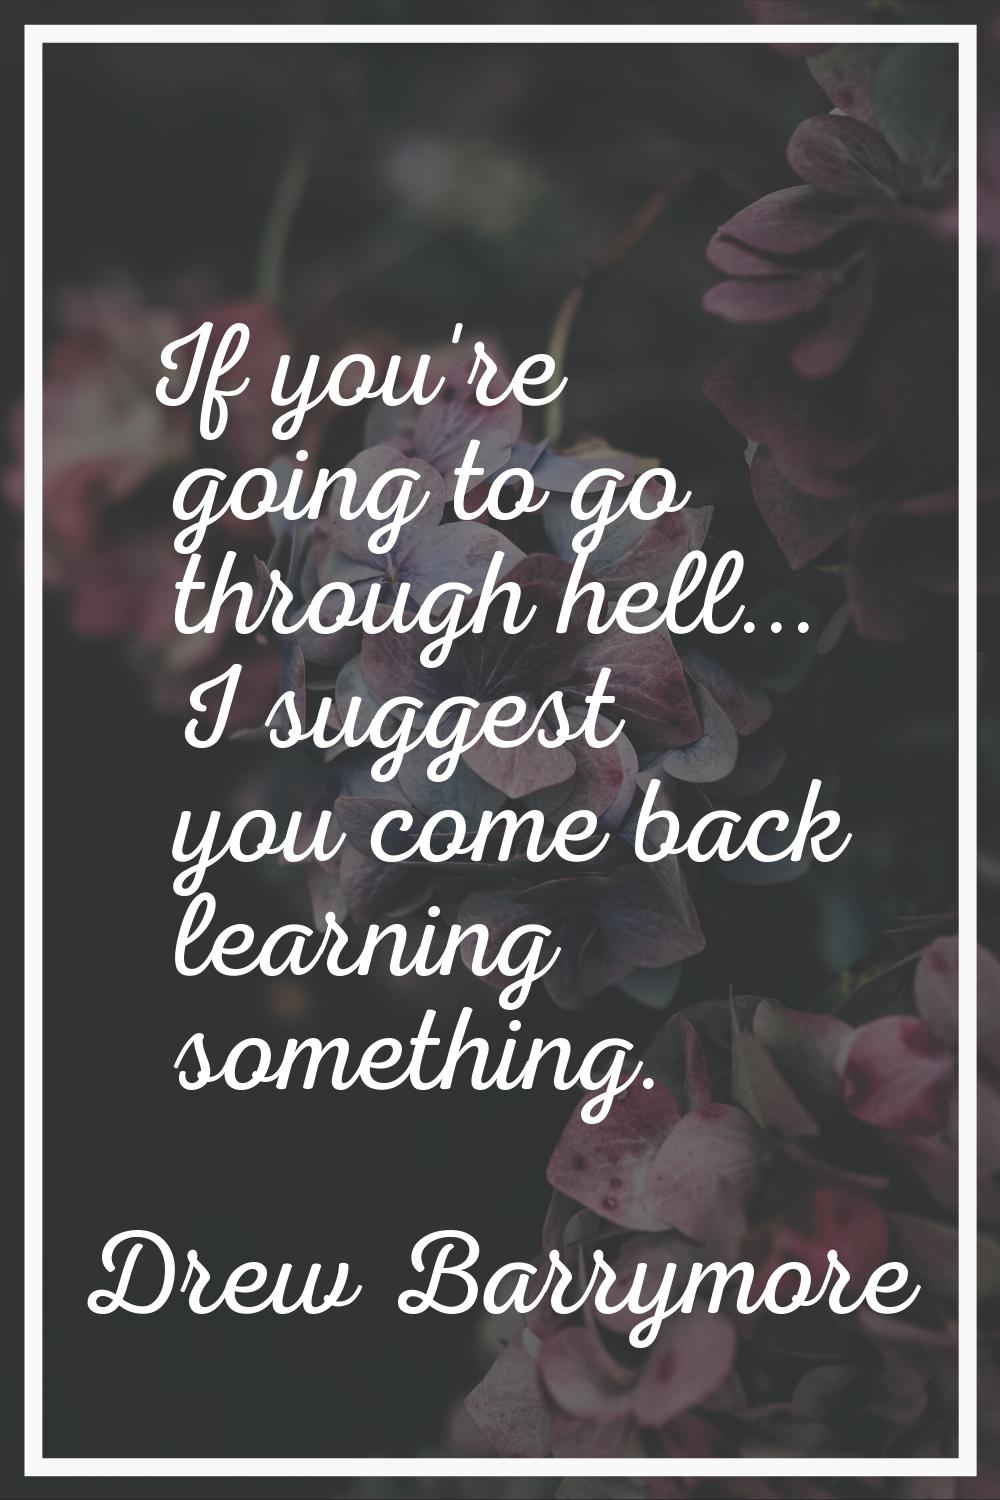 If you're going to go through hell... I suggest you come back learning something.